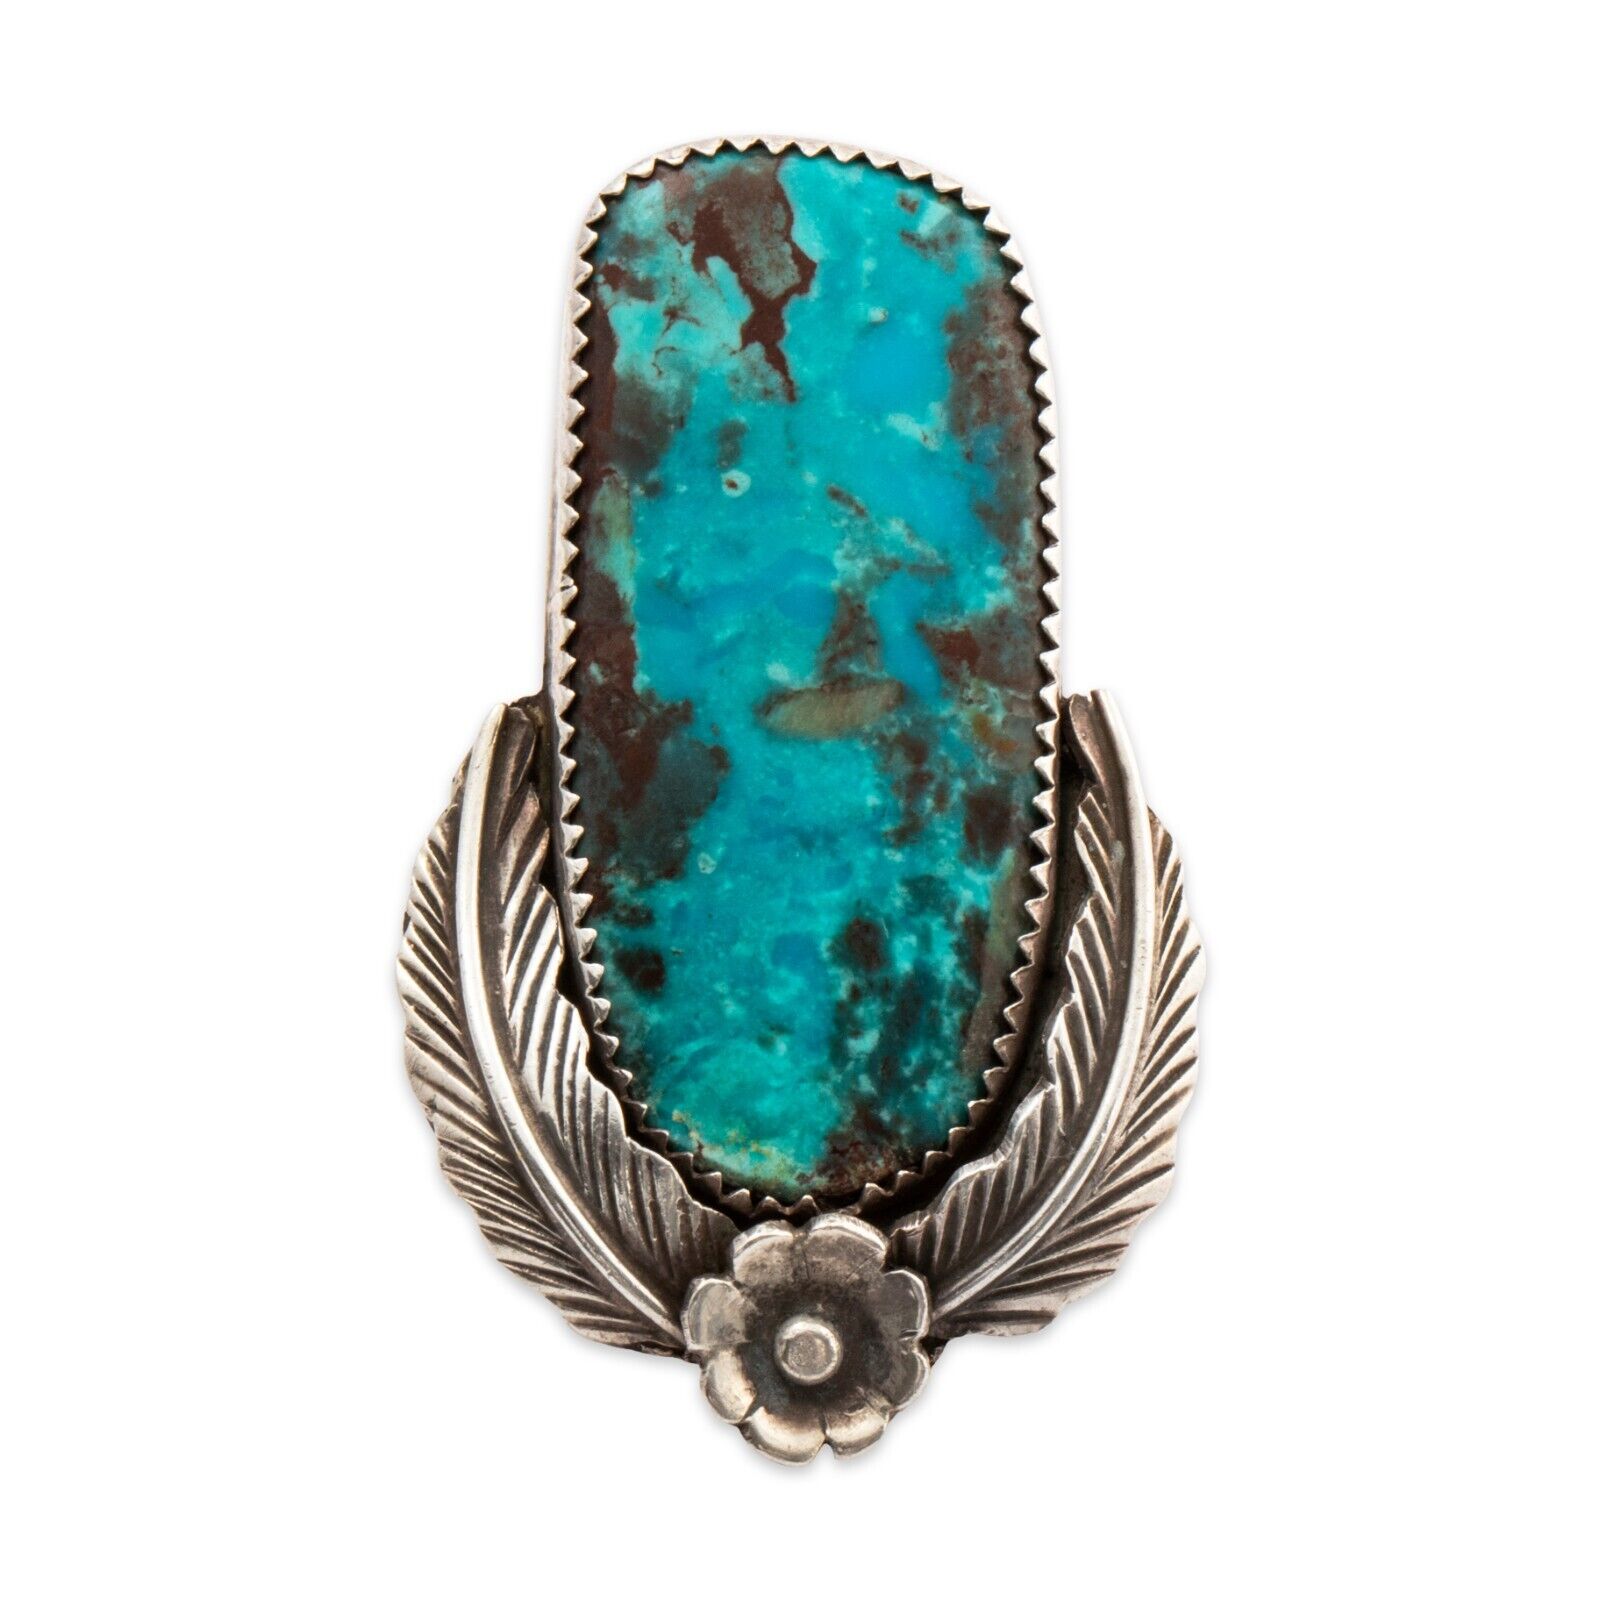 LARGE NATIVE AMERICAN STERLING BISBEE TURQUOISE APPLIED FLOWER & LEAF RING 5.25